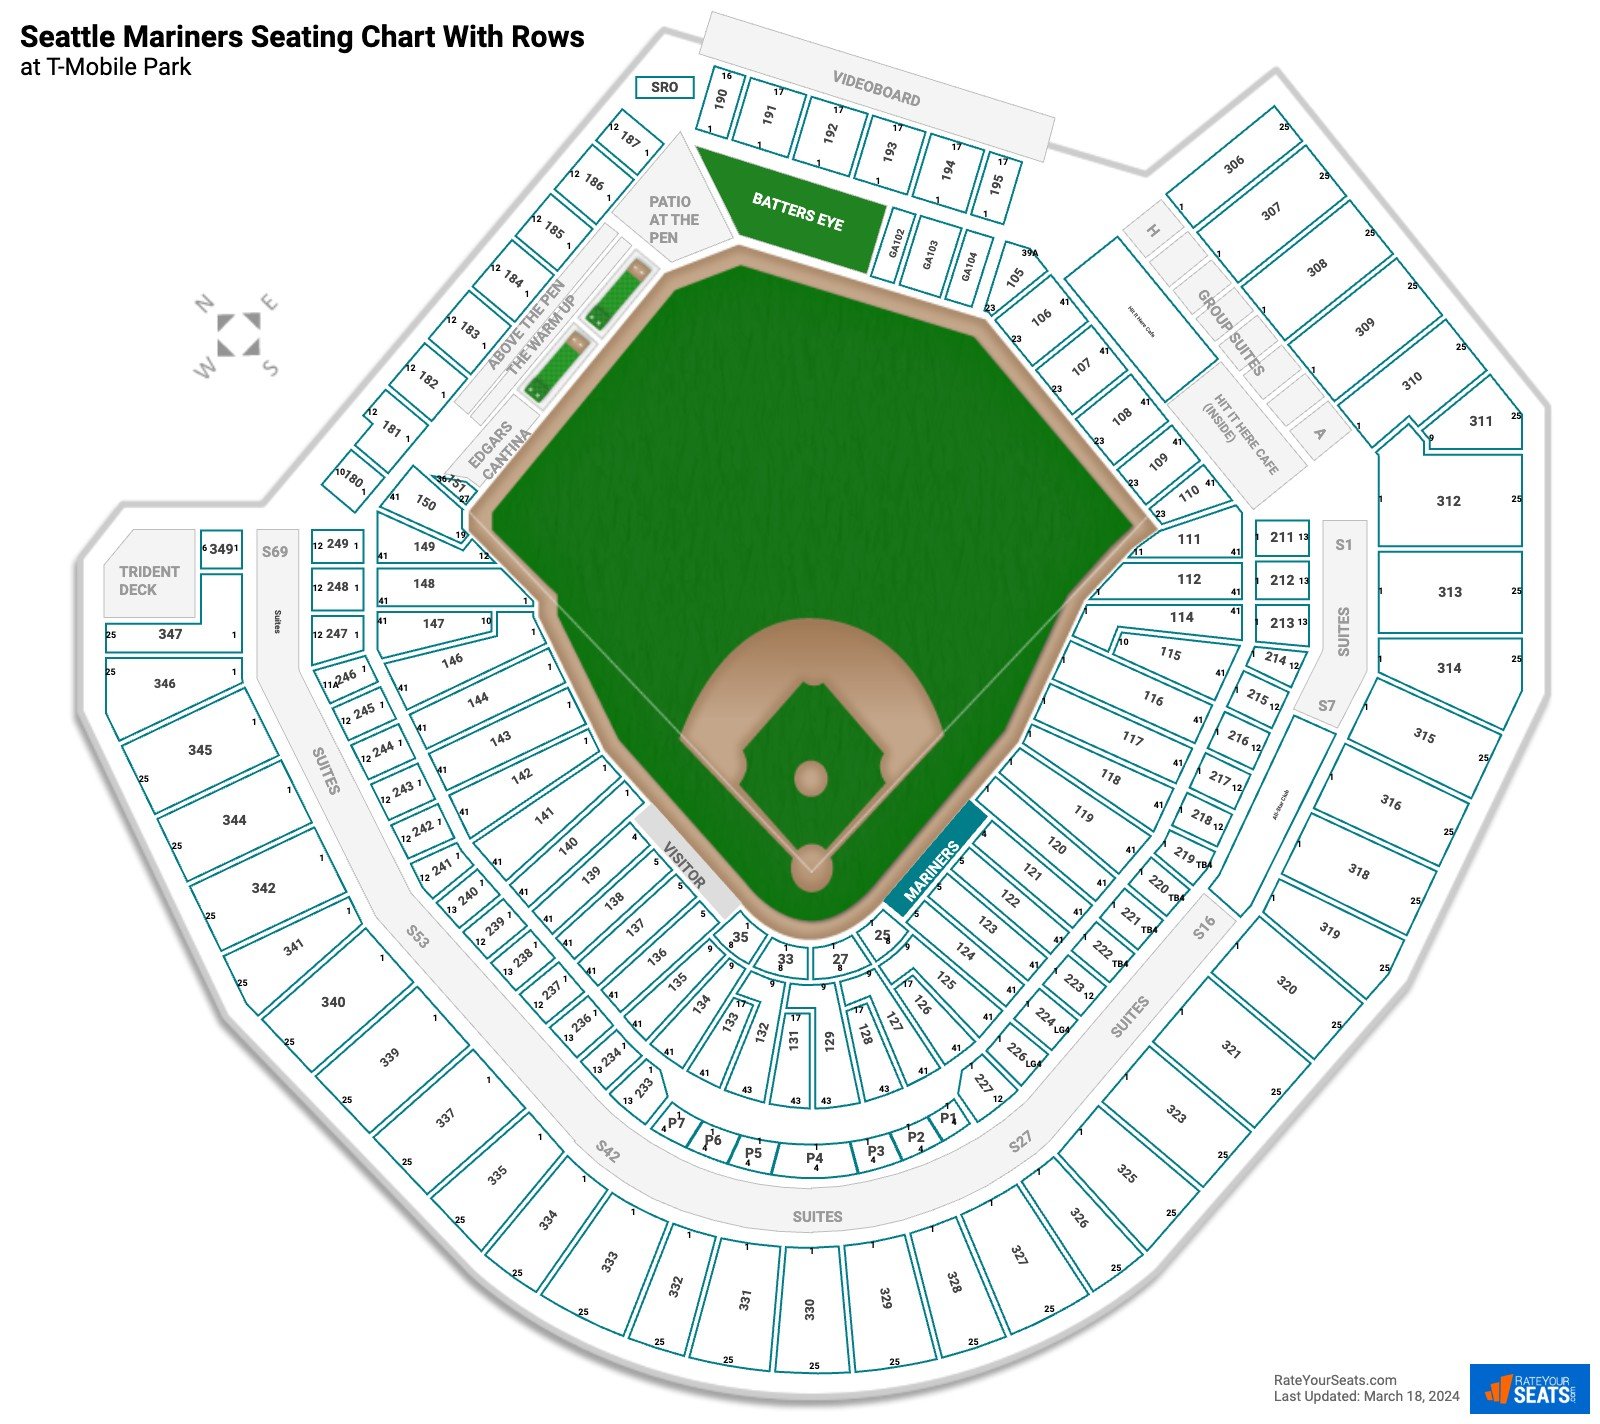 T-Mobile Park seating chart with row numbers